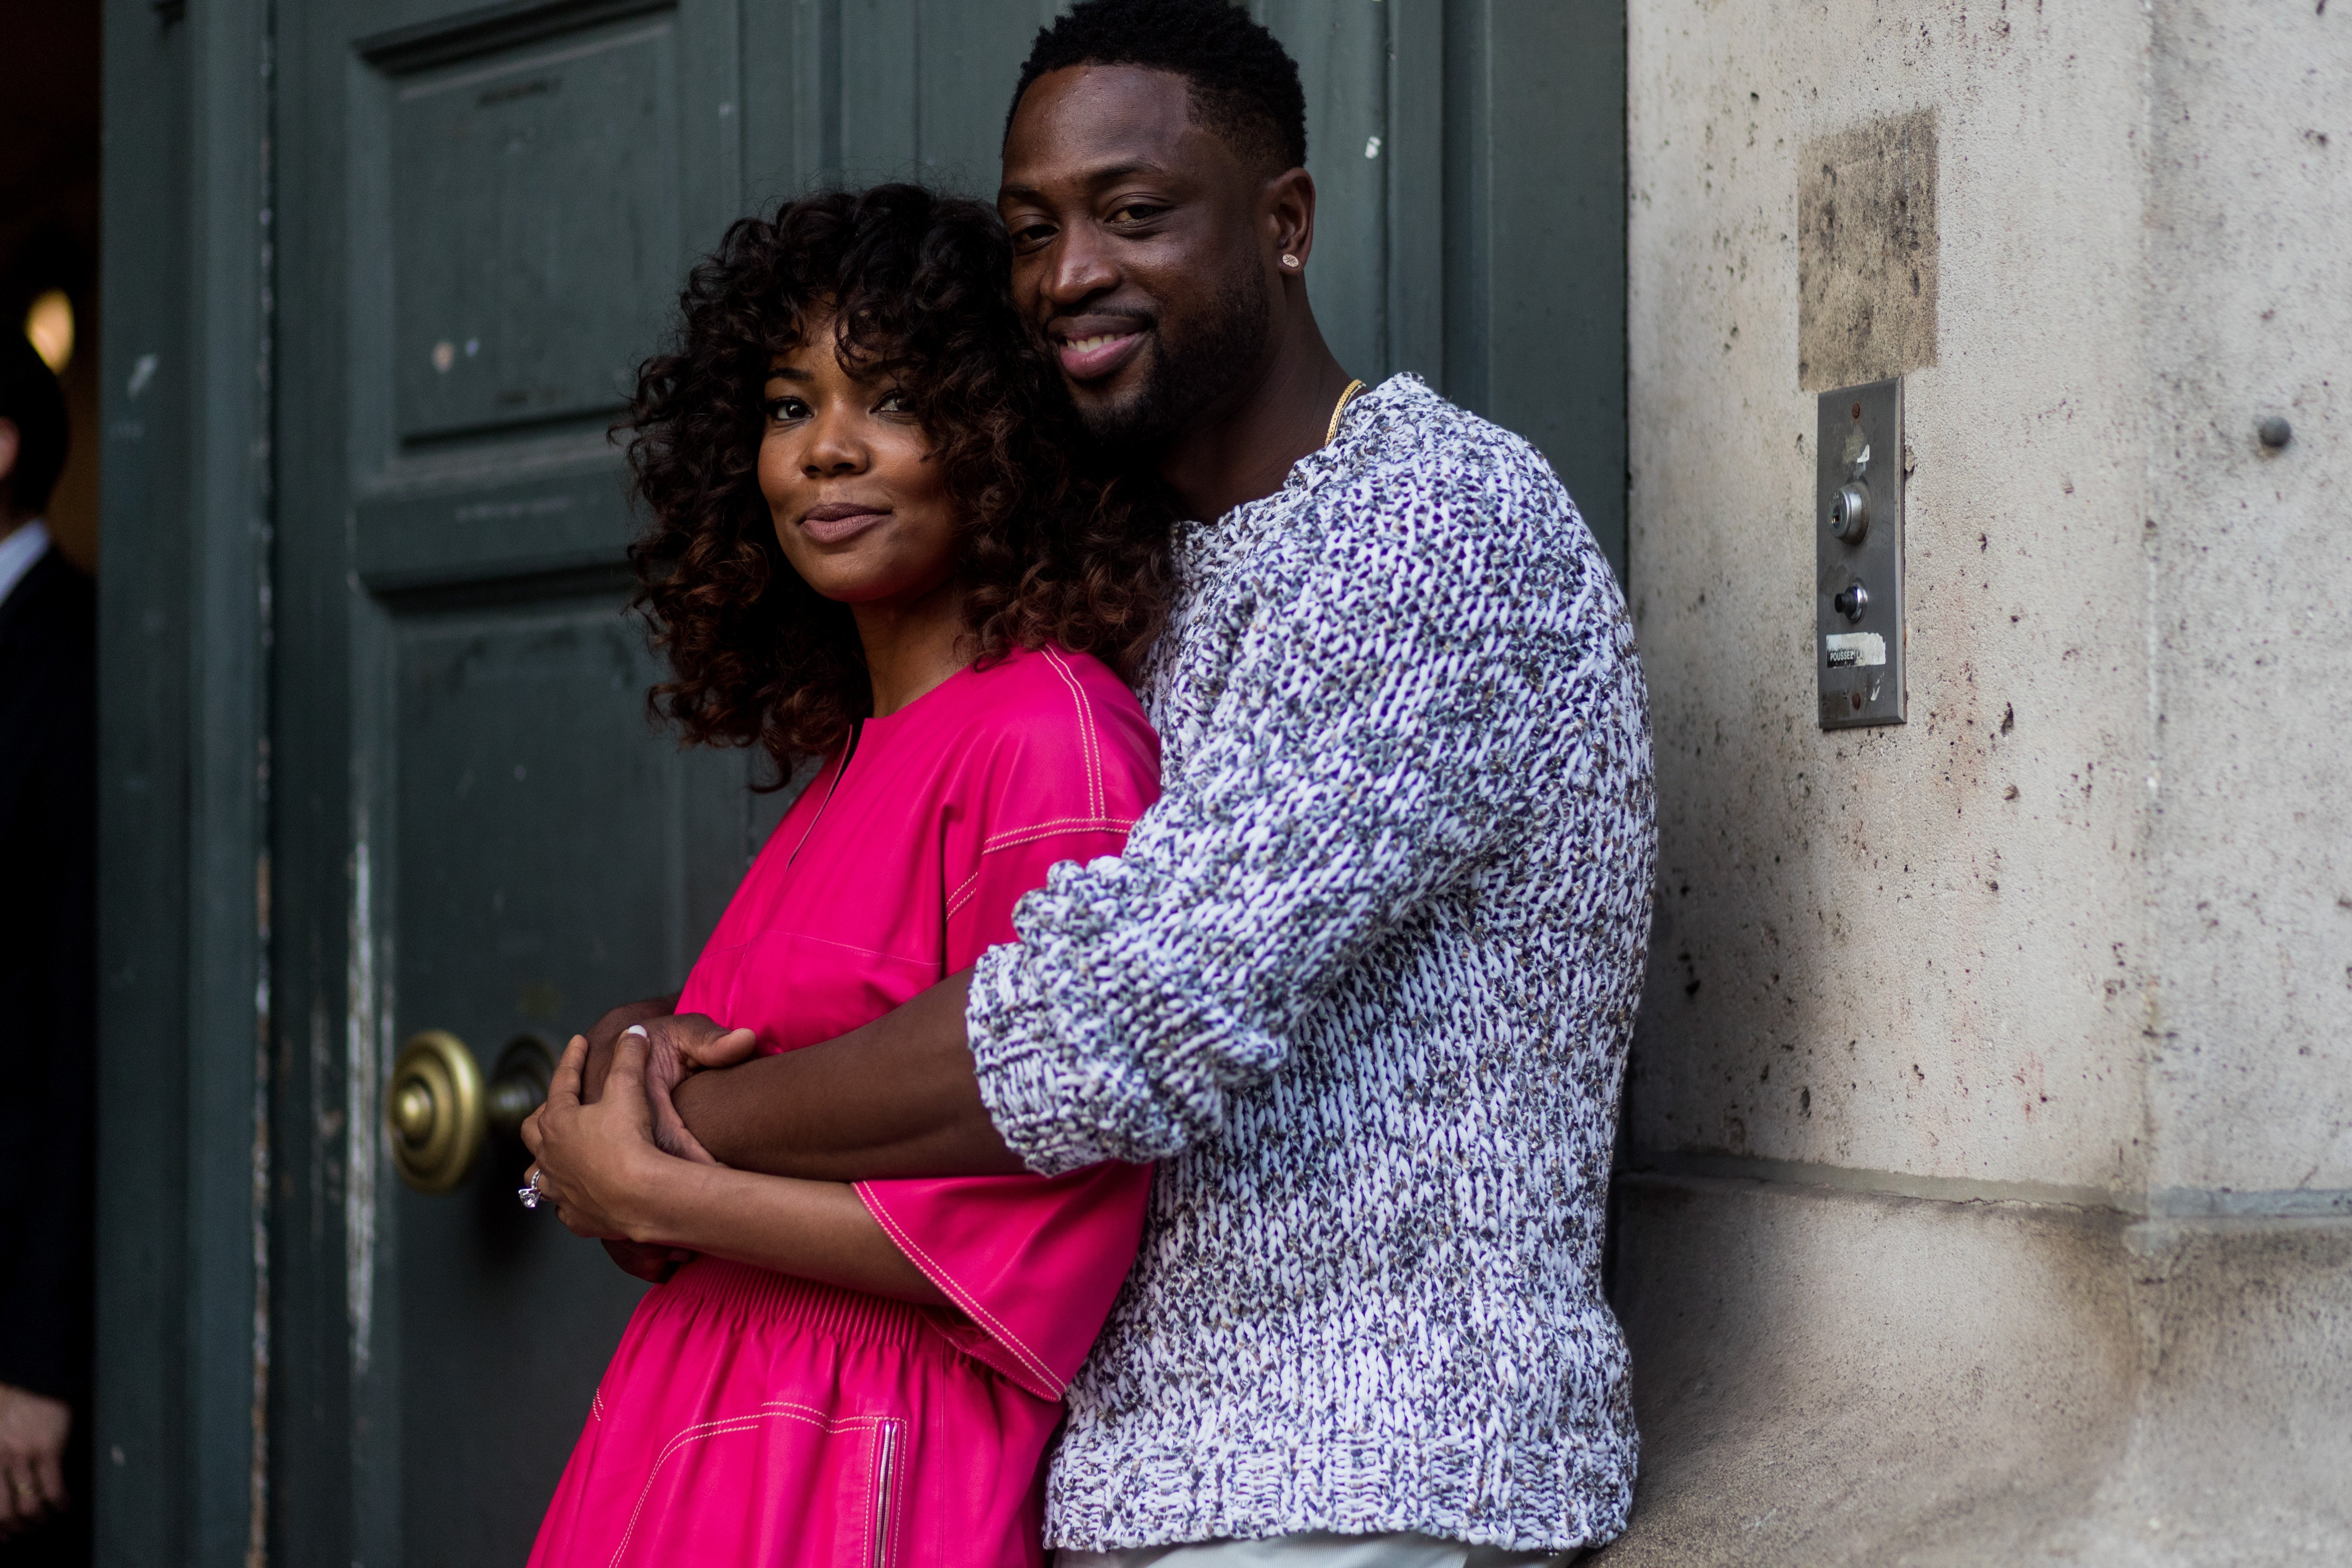 Gabrielle Union & Dwyane Wade hugging outside Hermés during Paris Fashion Week on June 24, 2017. | Photo: Getty Images